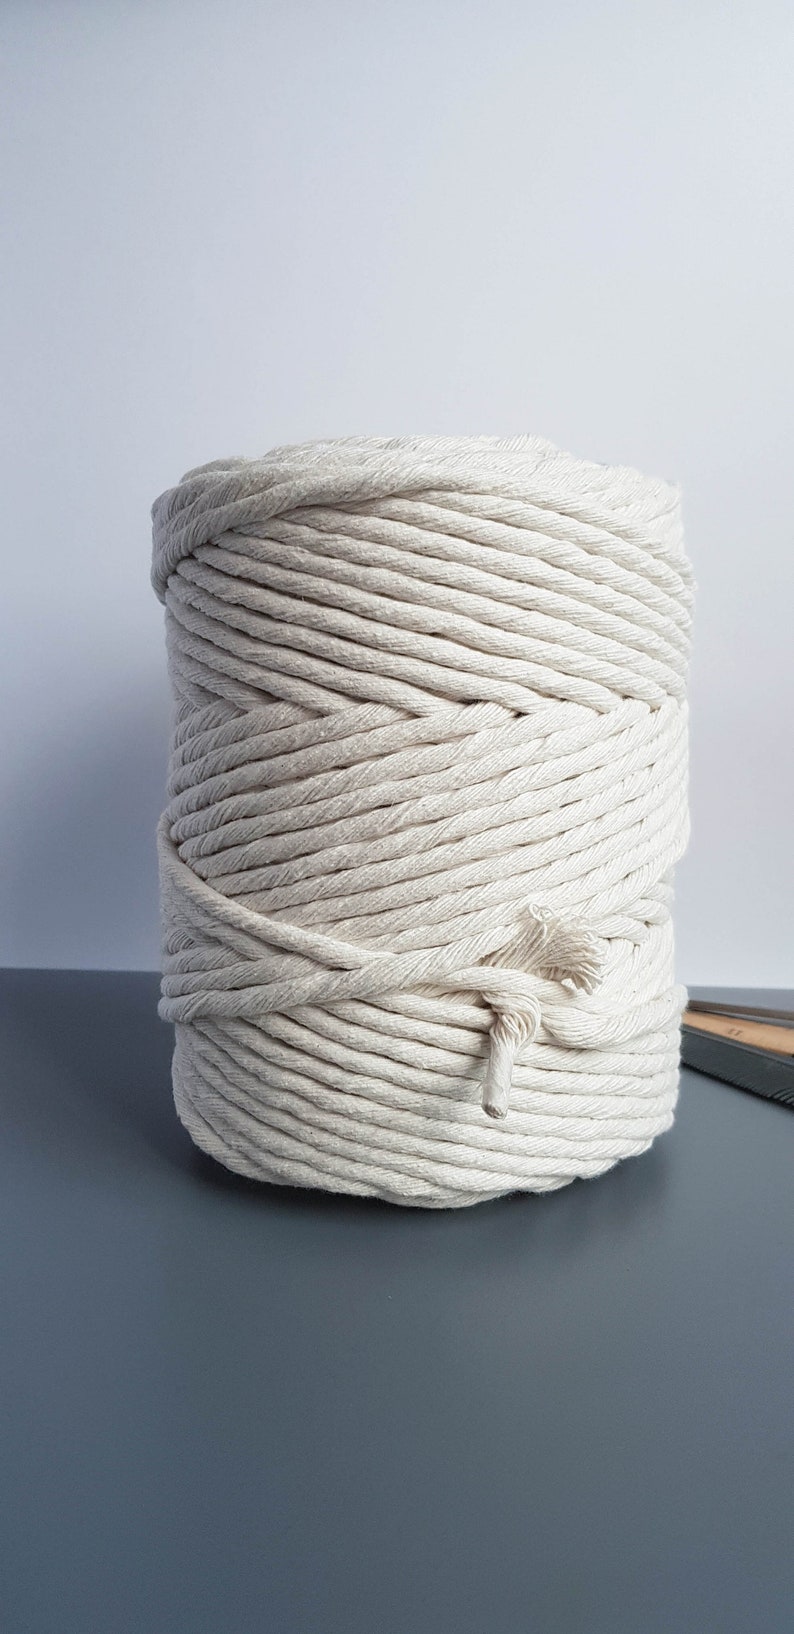 Natural Cotton rope 5mm single twist rope cotton cord 394 feet cotton macrame rope image 4